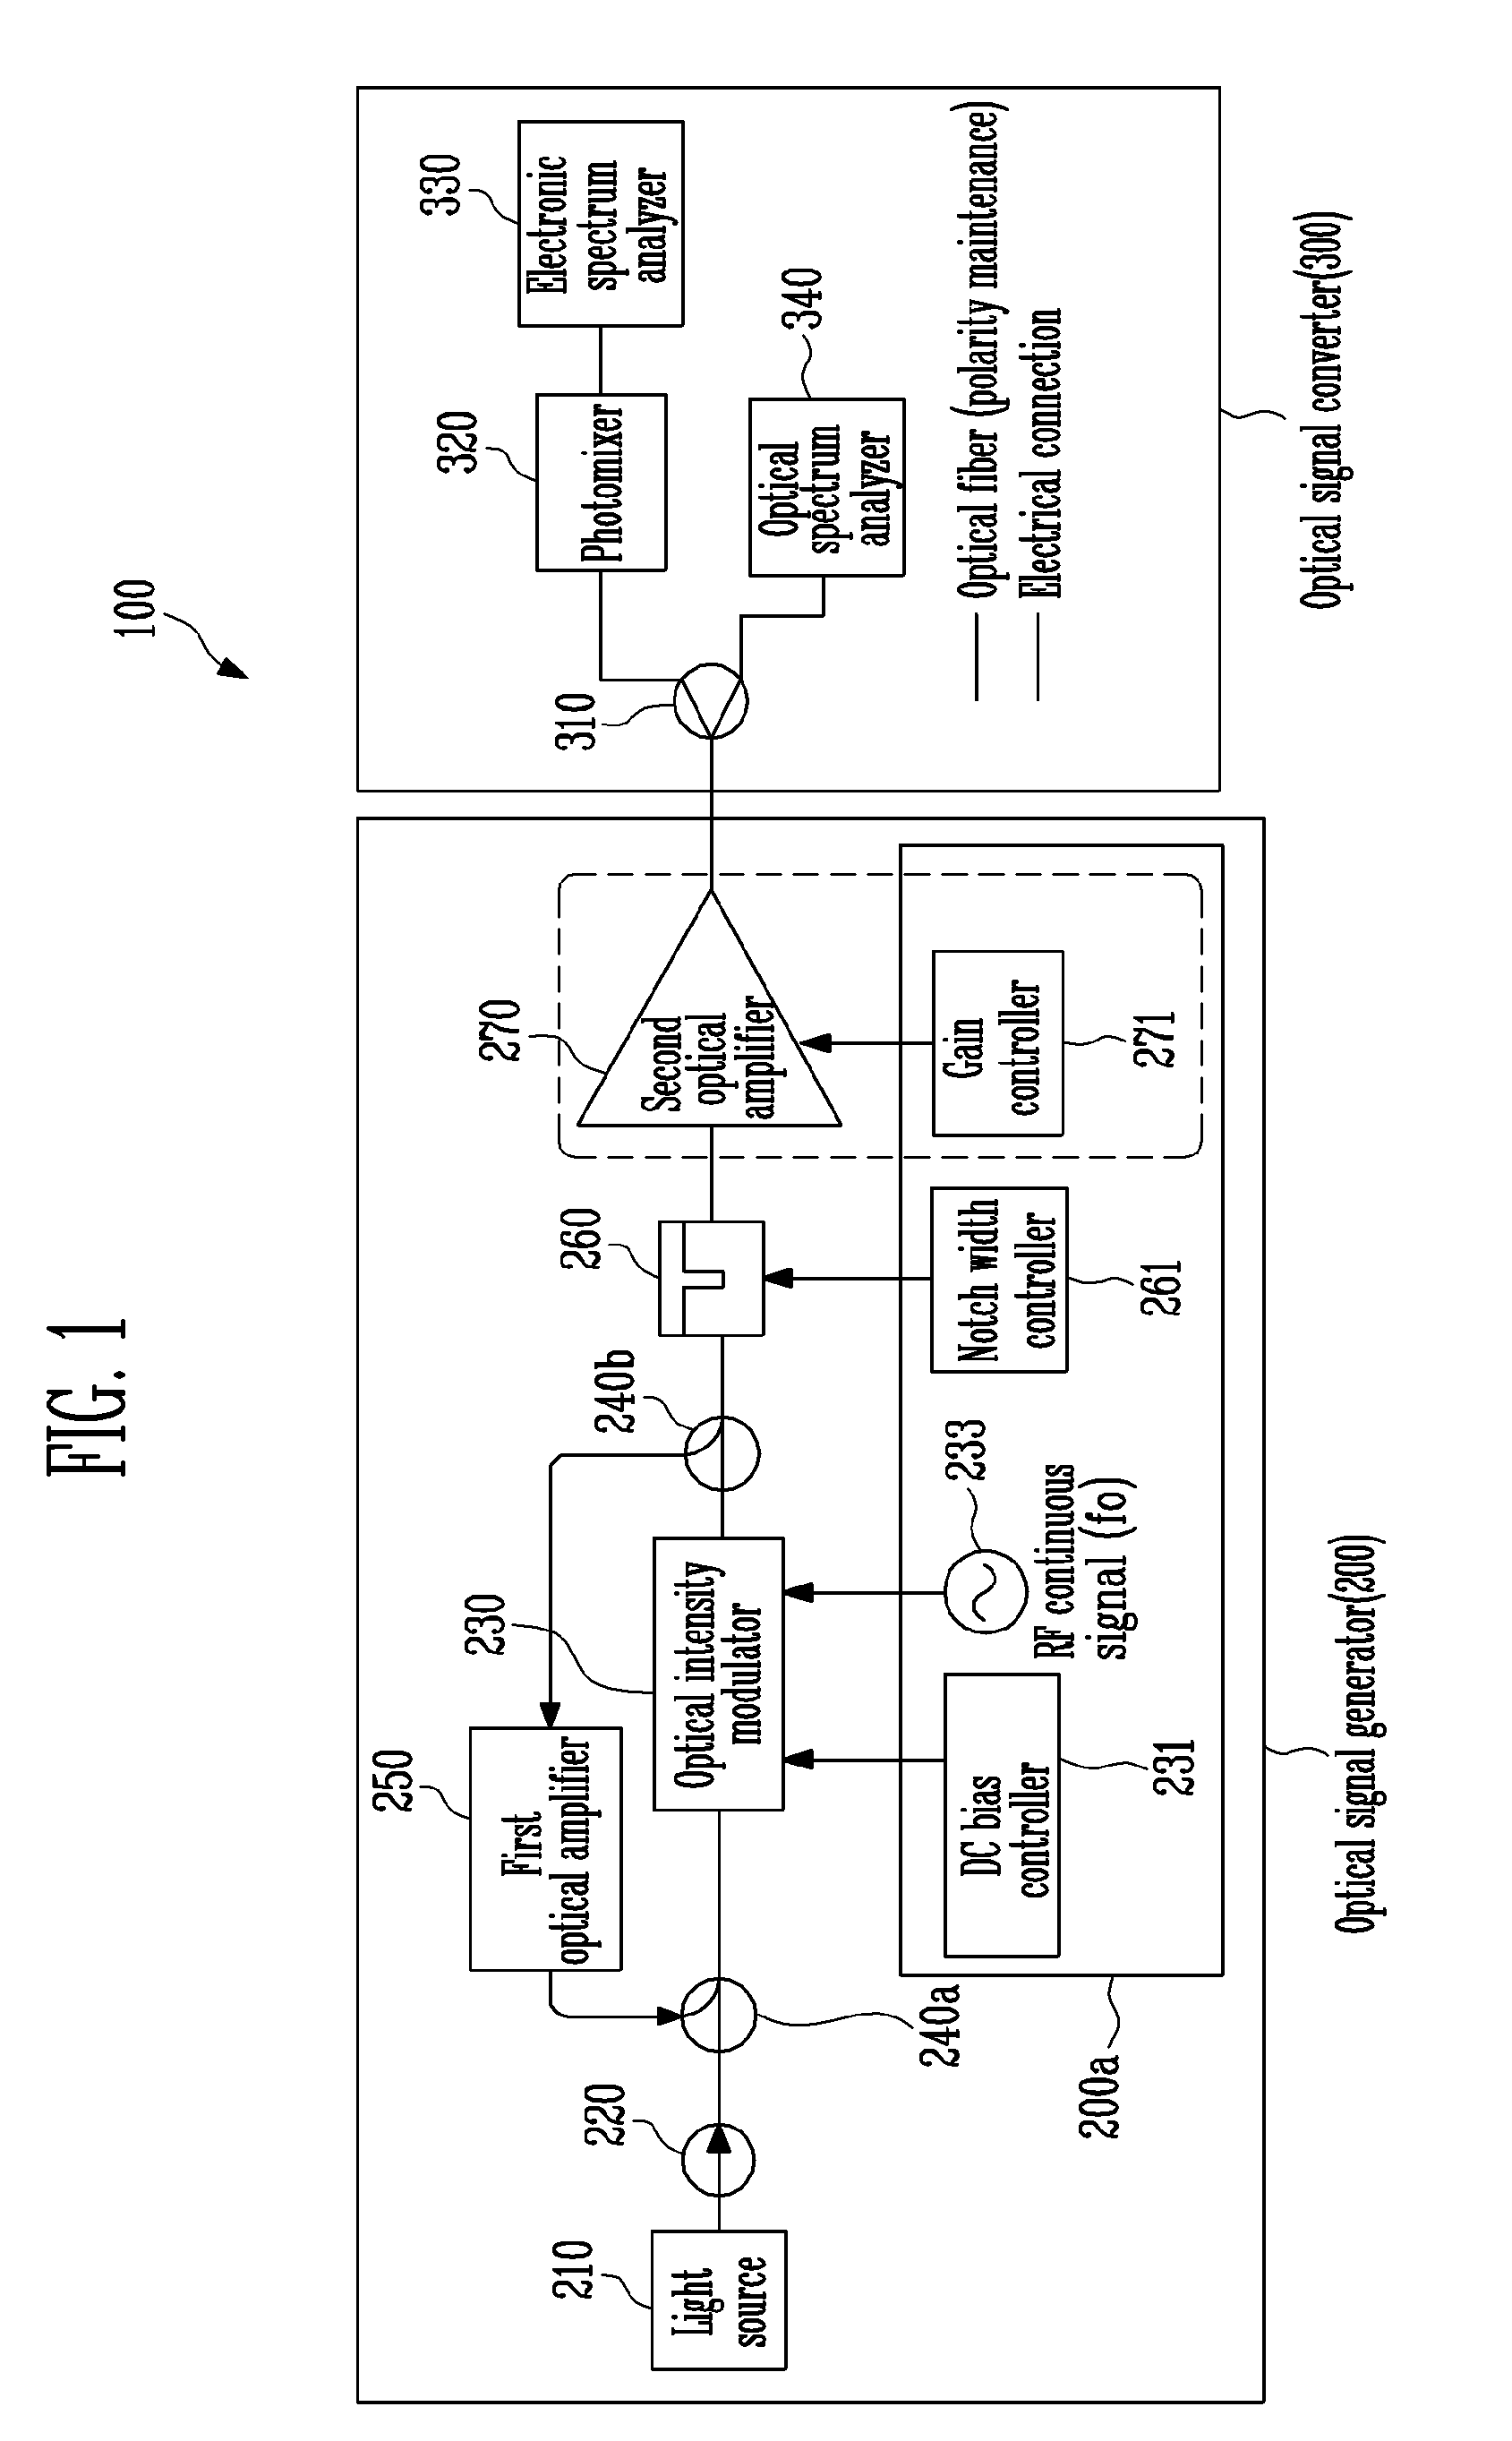 Frequency tunable terahertz continuous wave generator